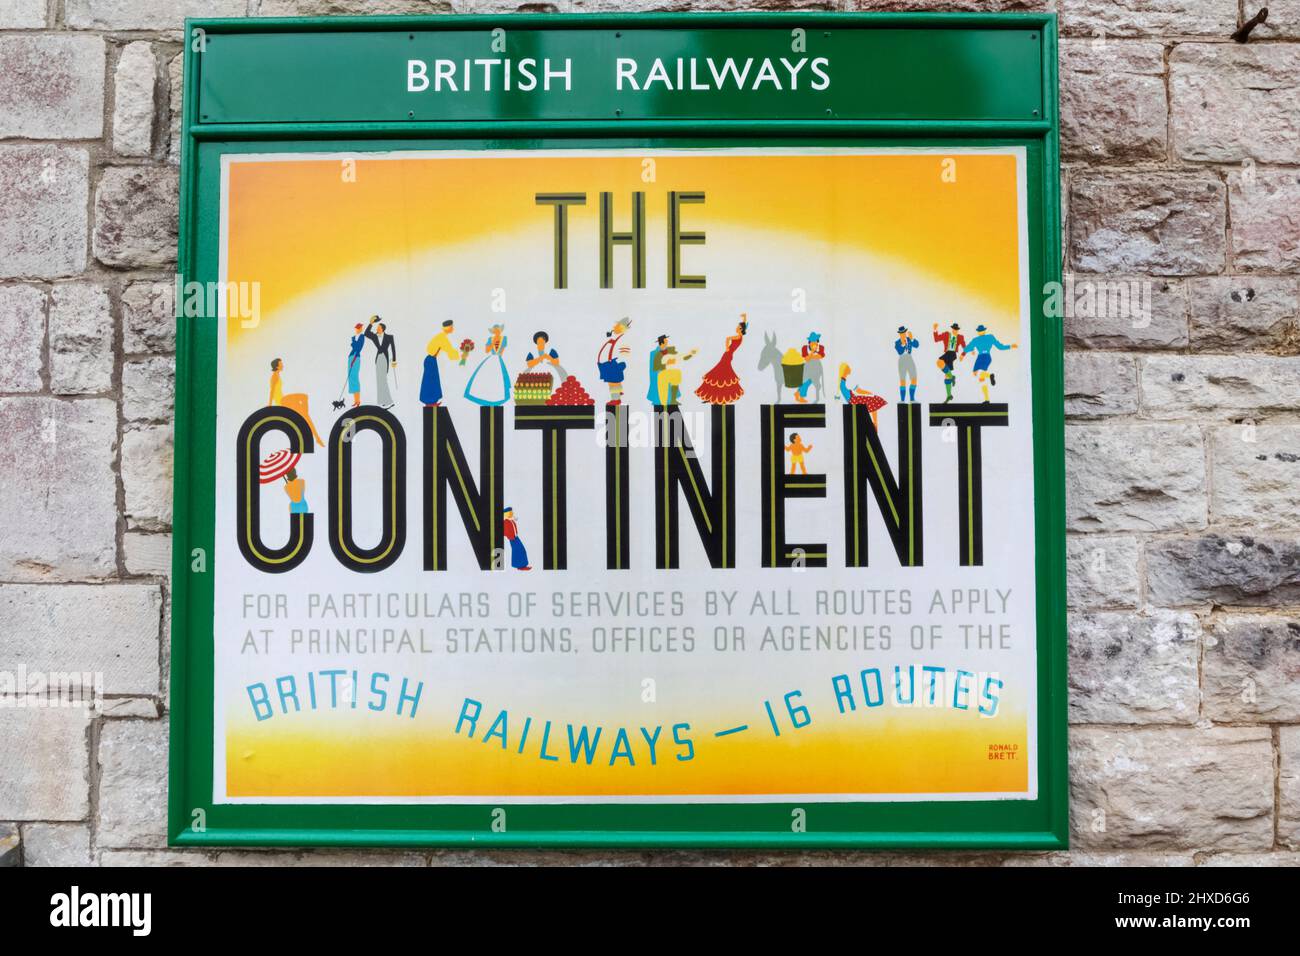 England, Dorset, Isle of Purbeck, Corfe Castle, The Historic Railway Station, Vintage Railway Poster Advertising Services to The Continent Stock Photo